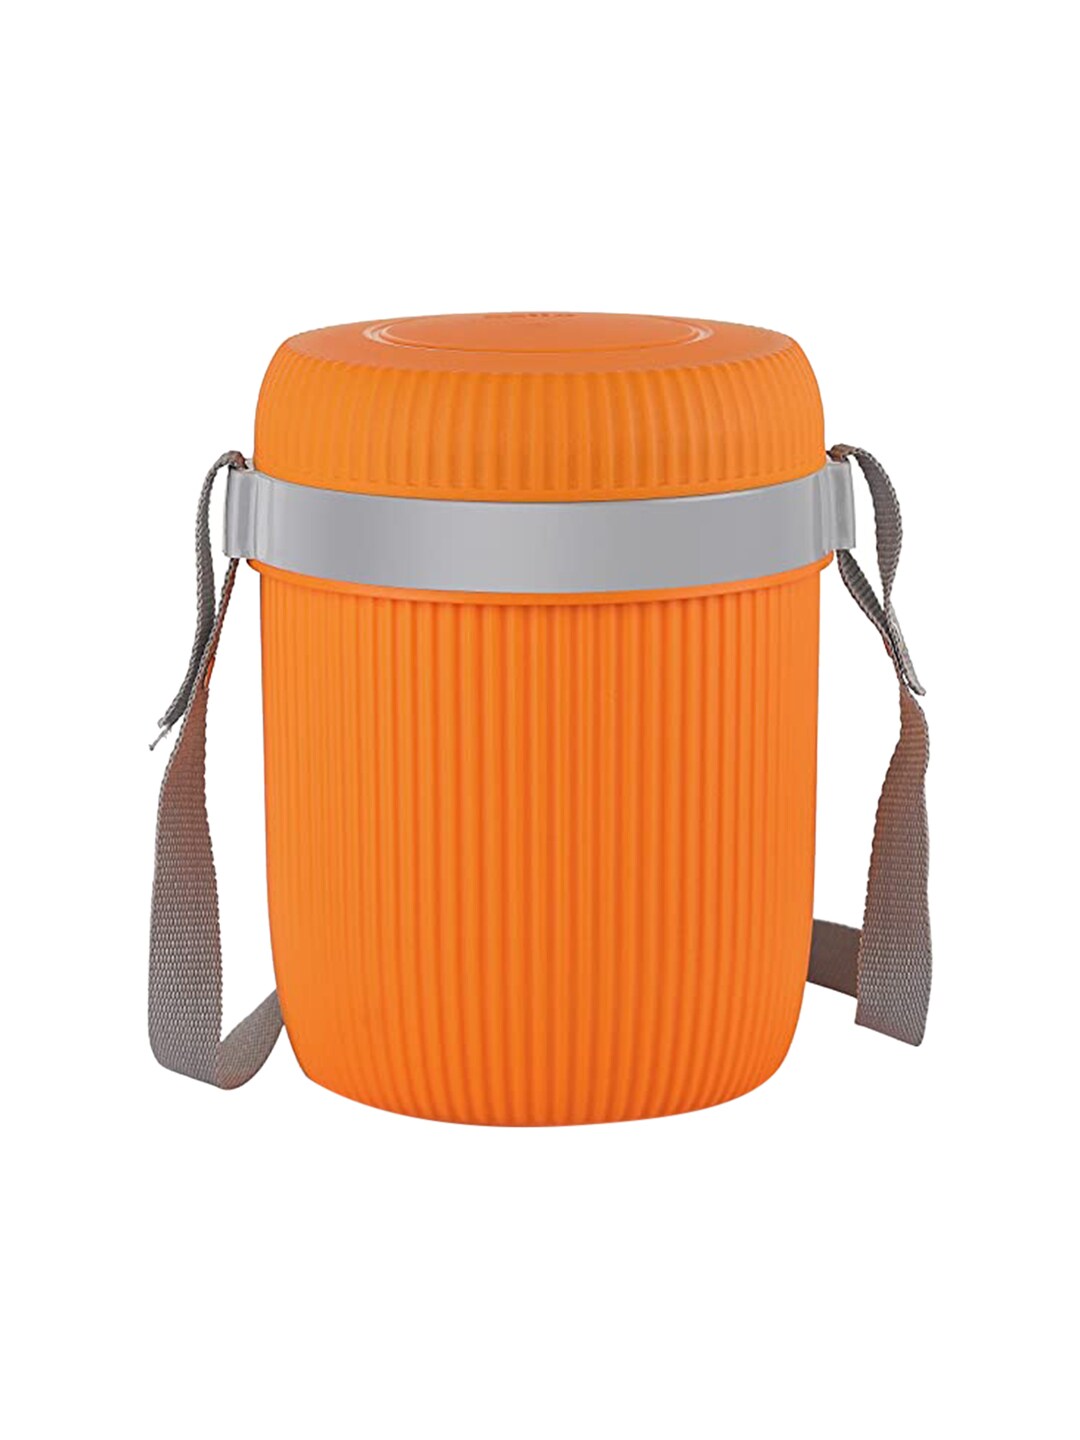 Cello Orange 4Pc Stainless Steel Lunch Box Price in India